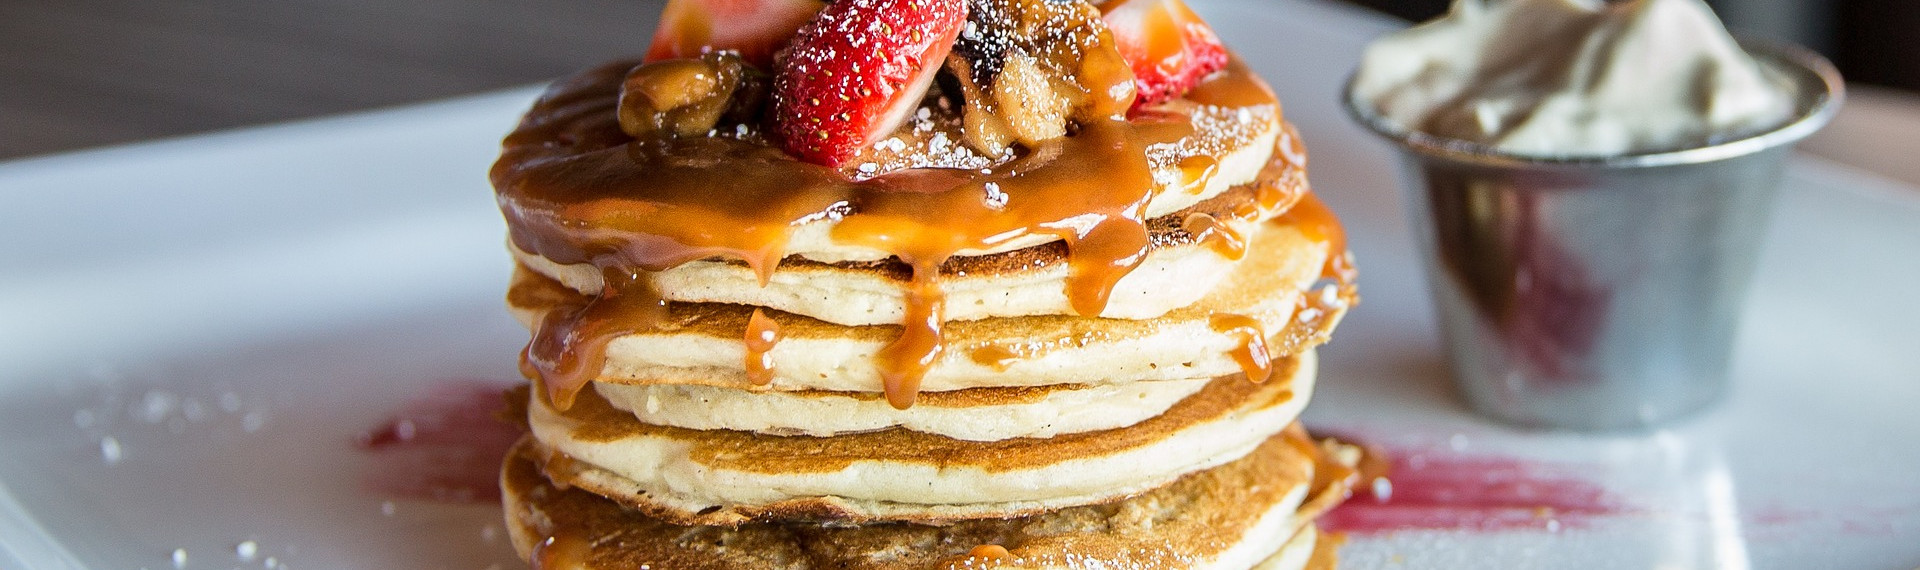 All-you-can-eat-Pancakes in Amsterdam | Süßer JGA-Schmaus | Pissup Reisen